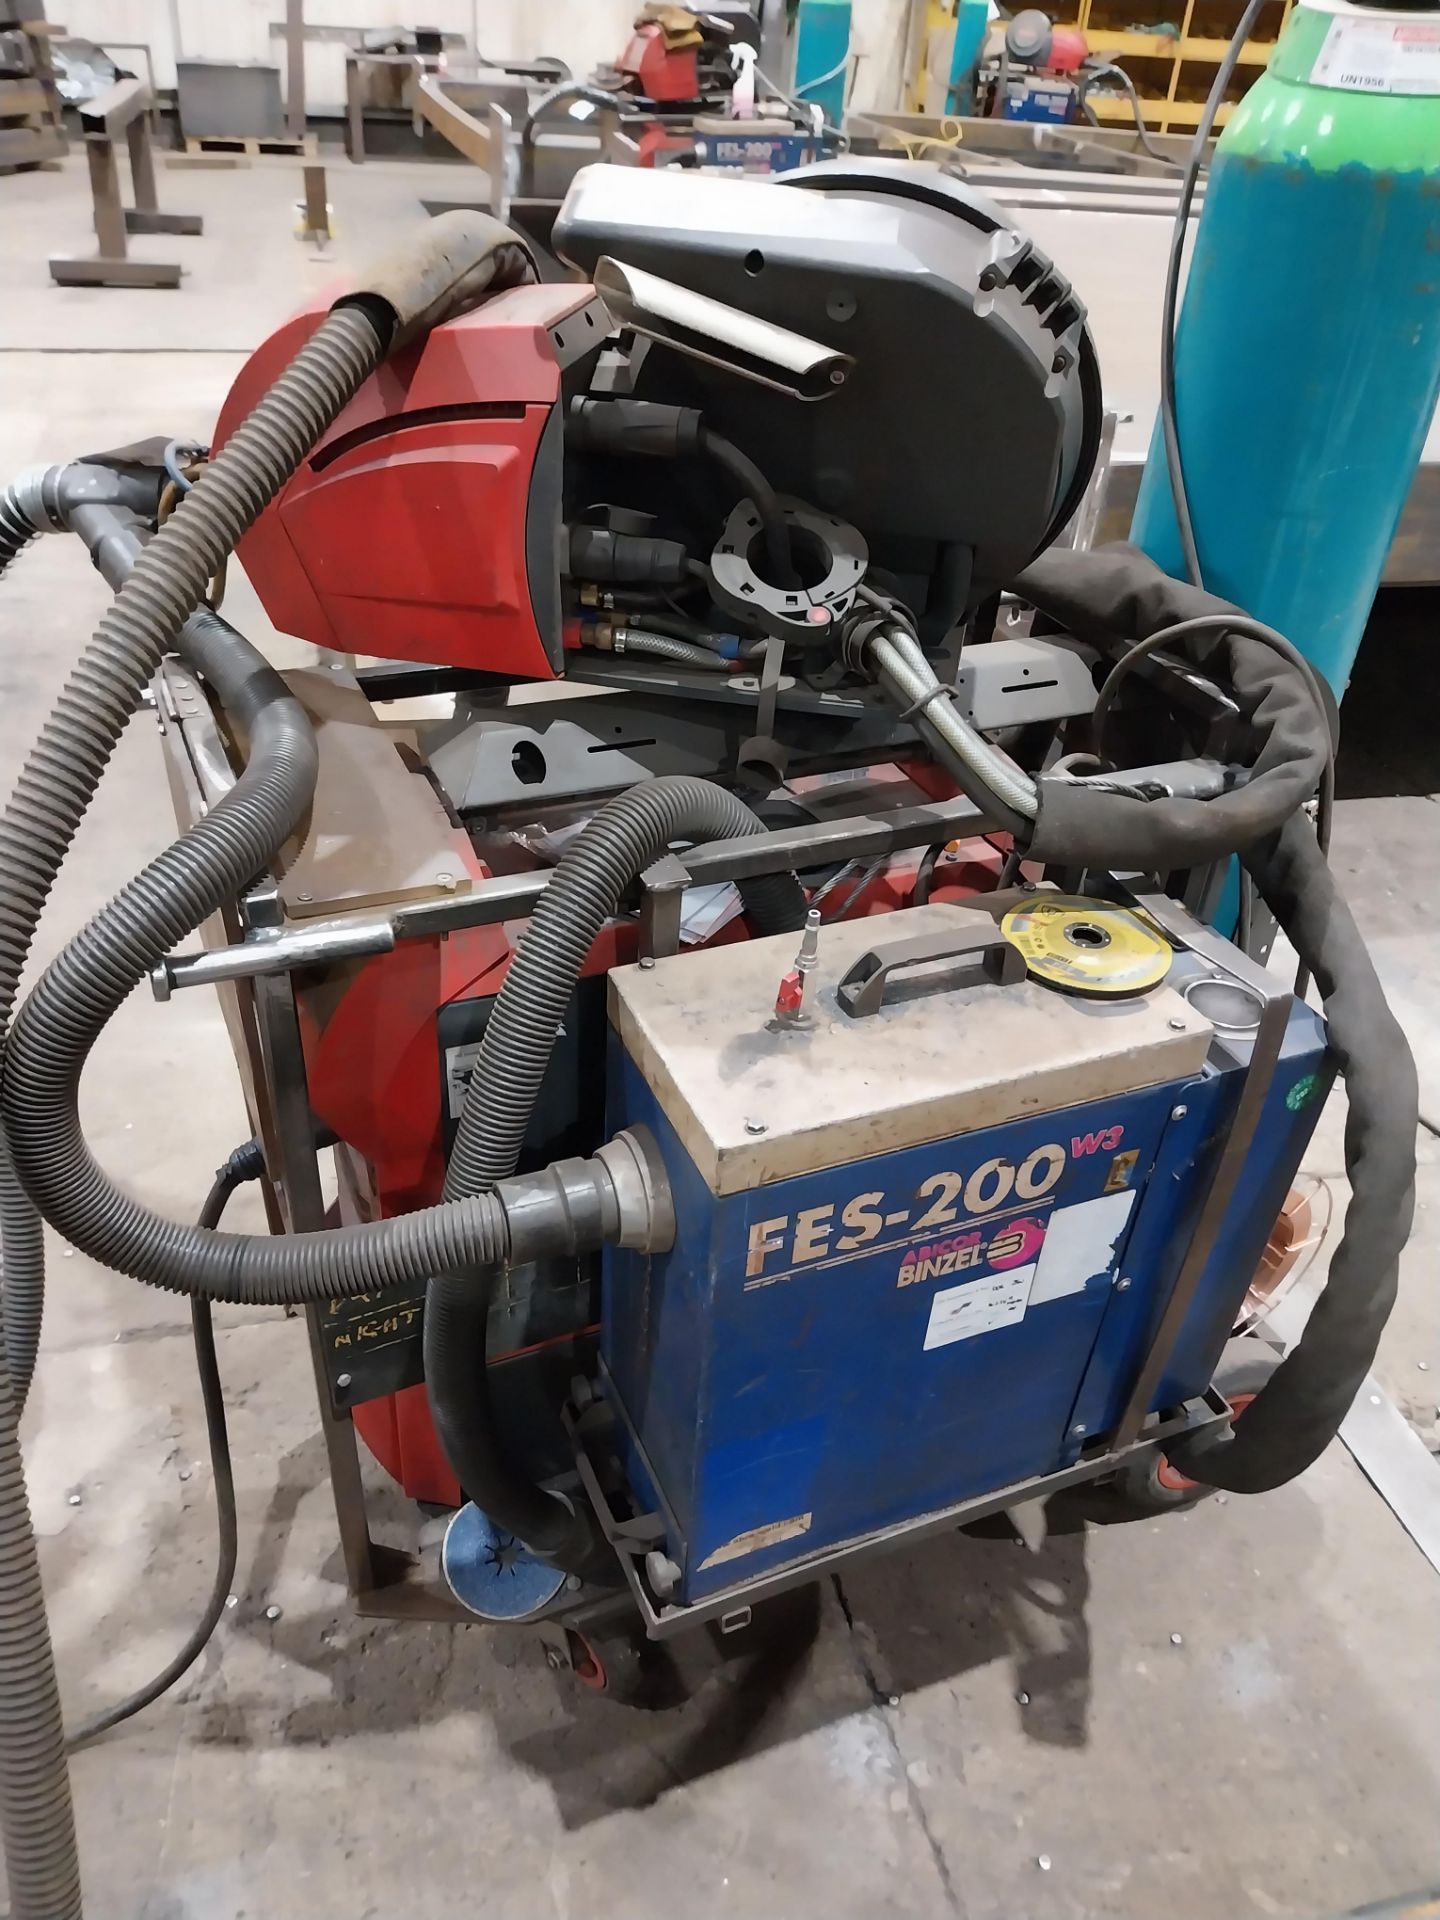 Fronius TPS400i mig welder with WF25i wire feed, Binzel FES-200 W3 extractor, torch and clamp ( - Bild 6 aus 7